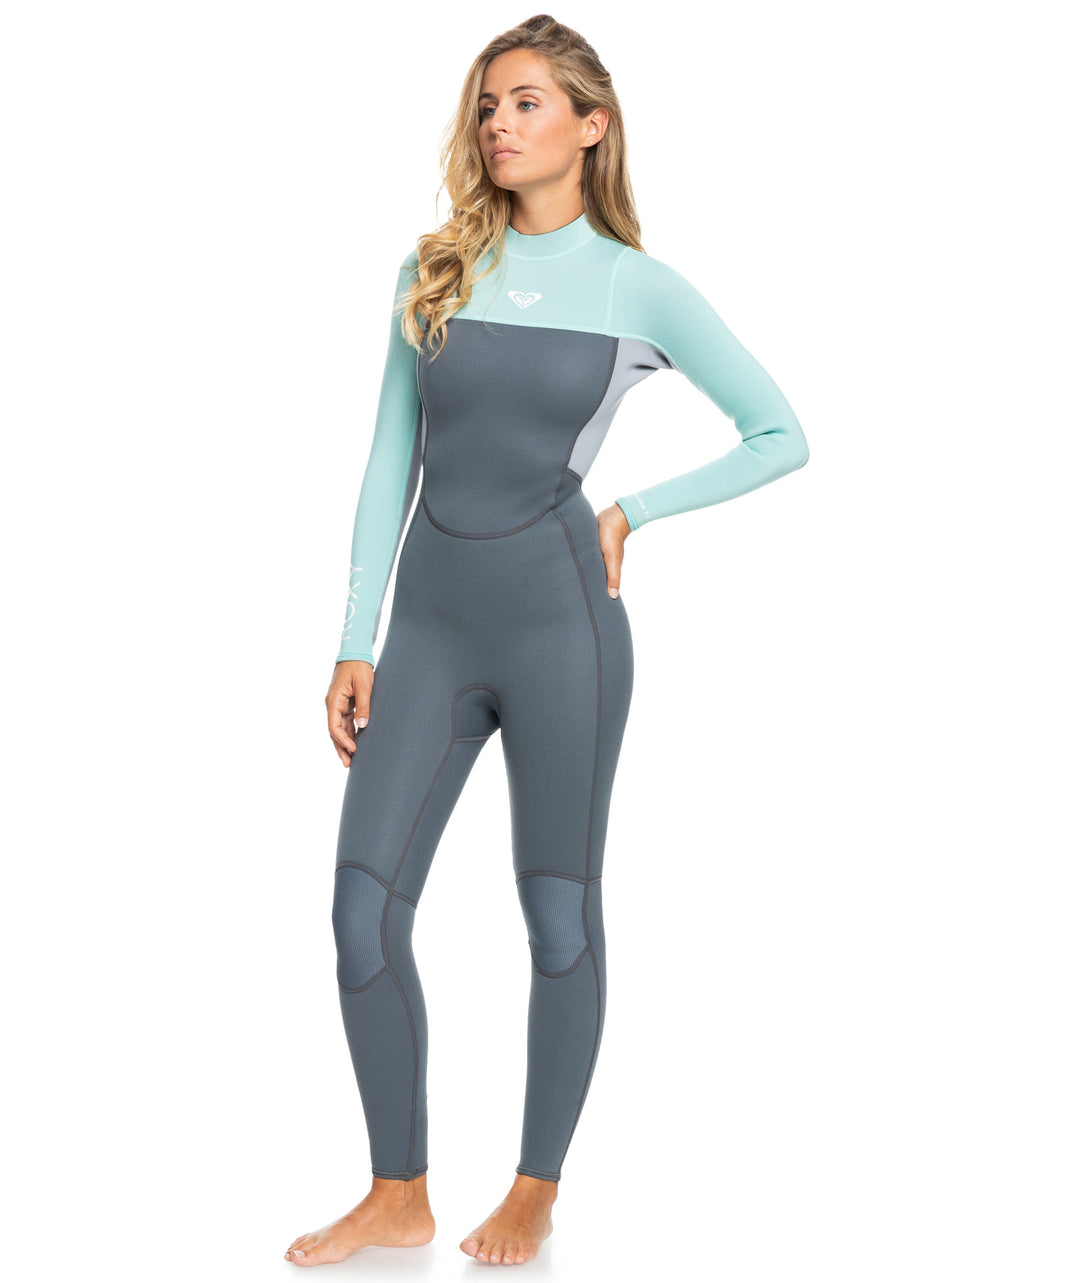 Prologue 3/2 Back Zip Steamer Wetsuit - Ice Green